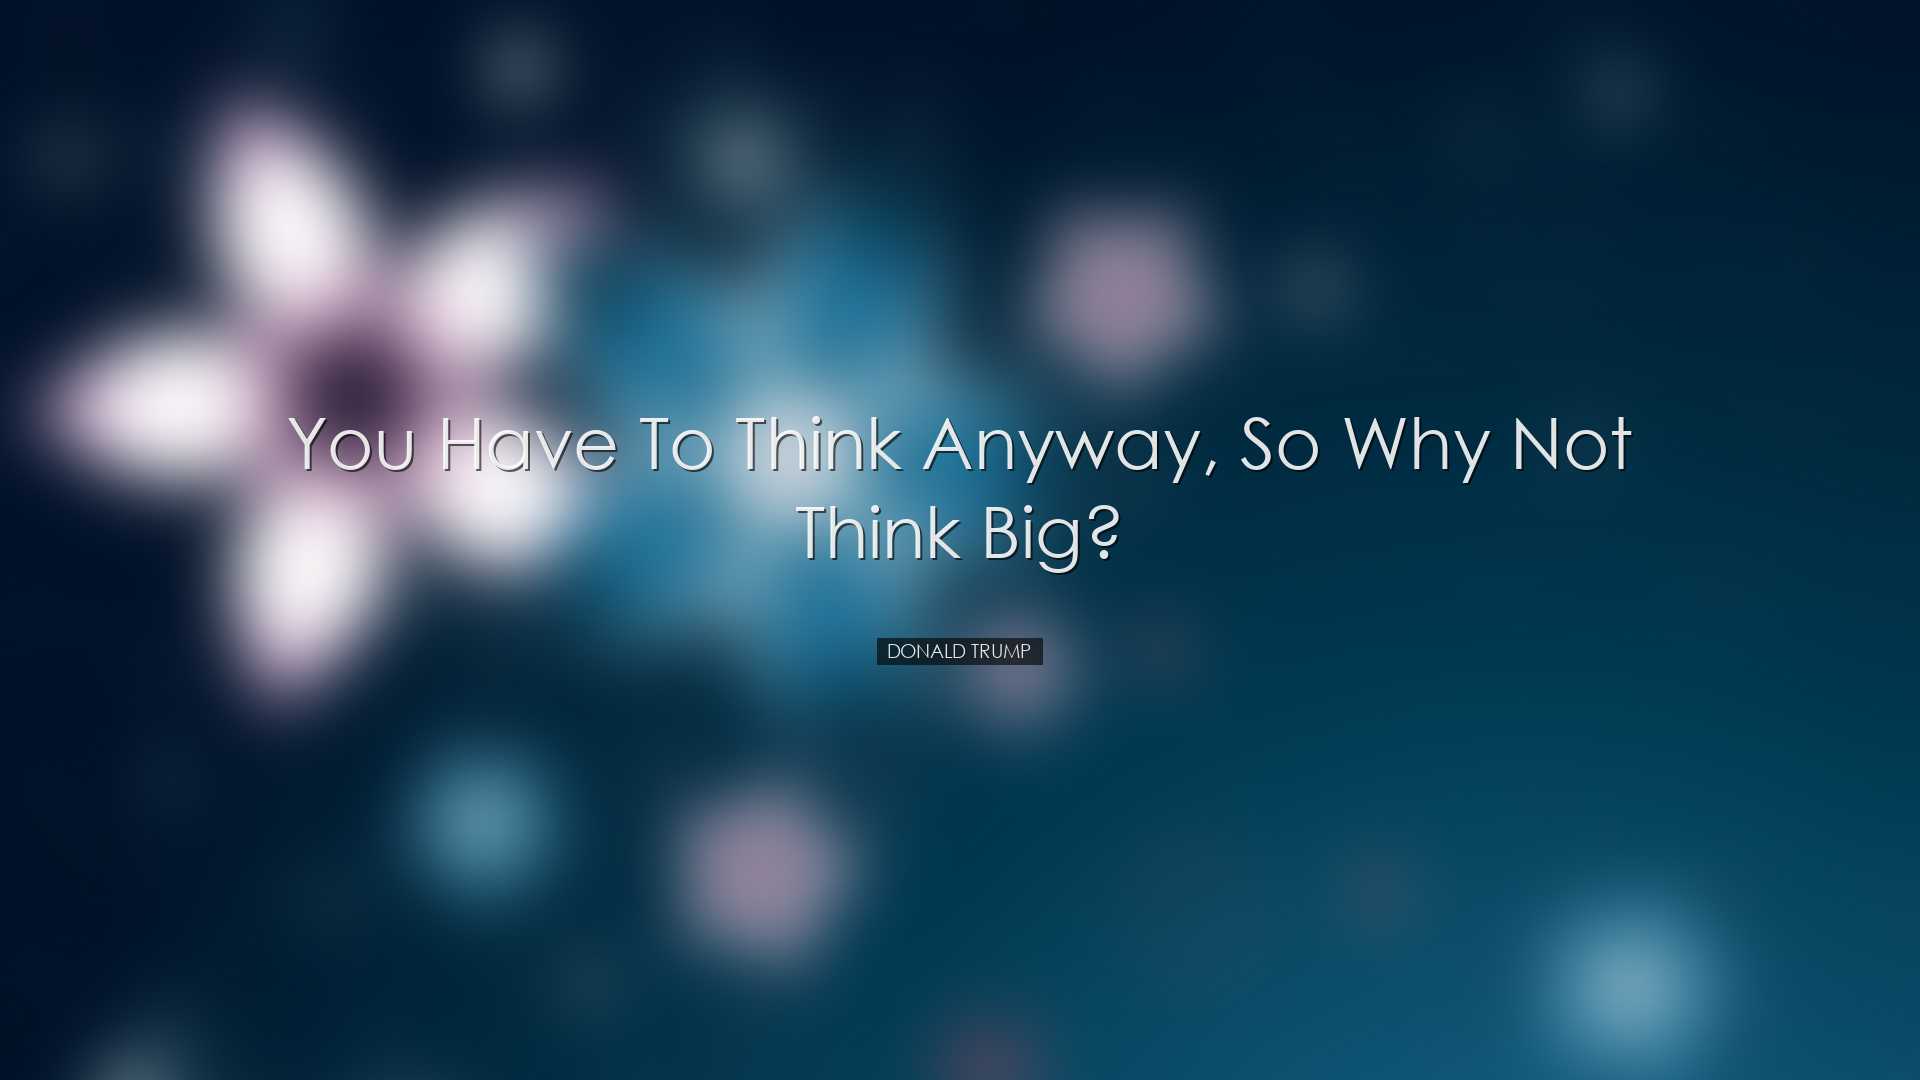 You have to think anyway, so why not think big? - Donald Trump